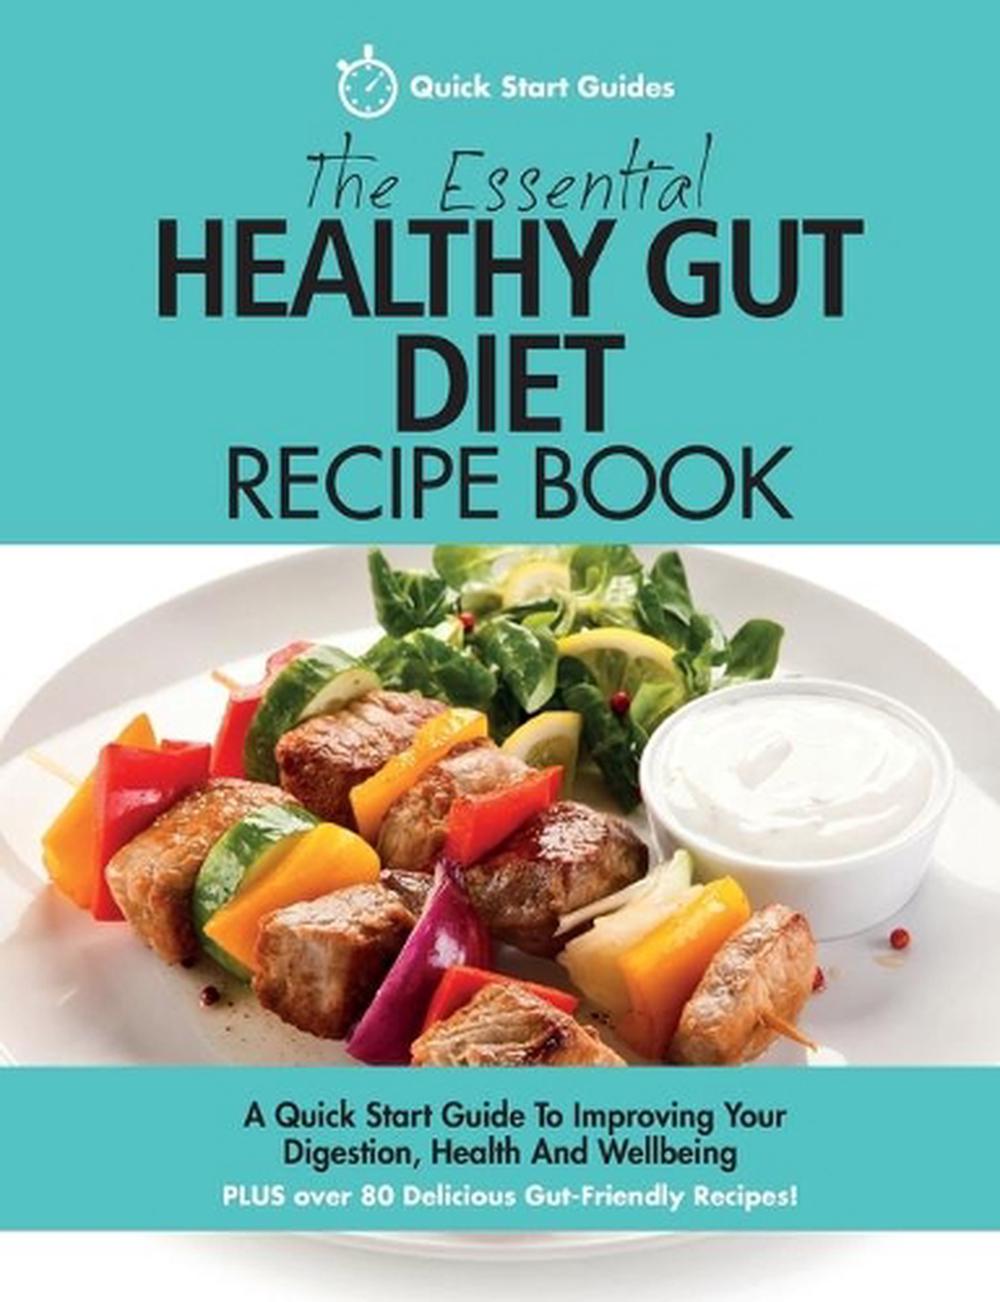 Essential Healthy Gut Diet Recipe Book by Quick Start Guides (English